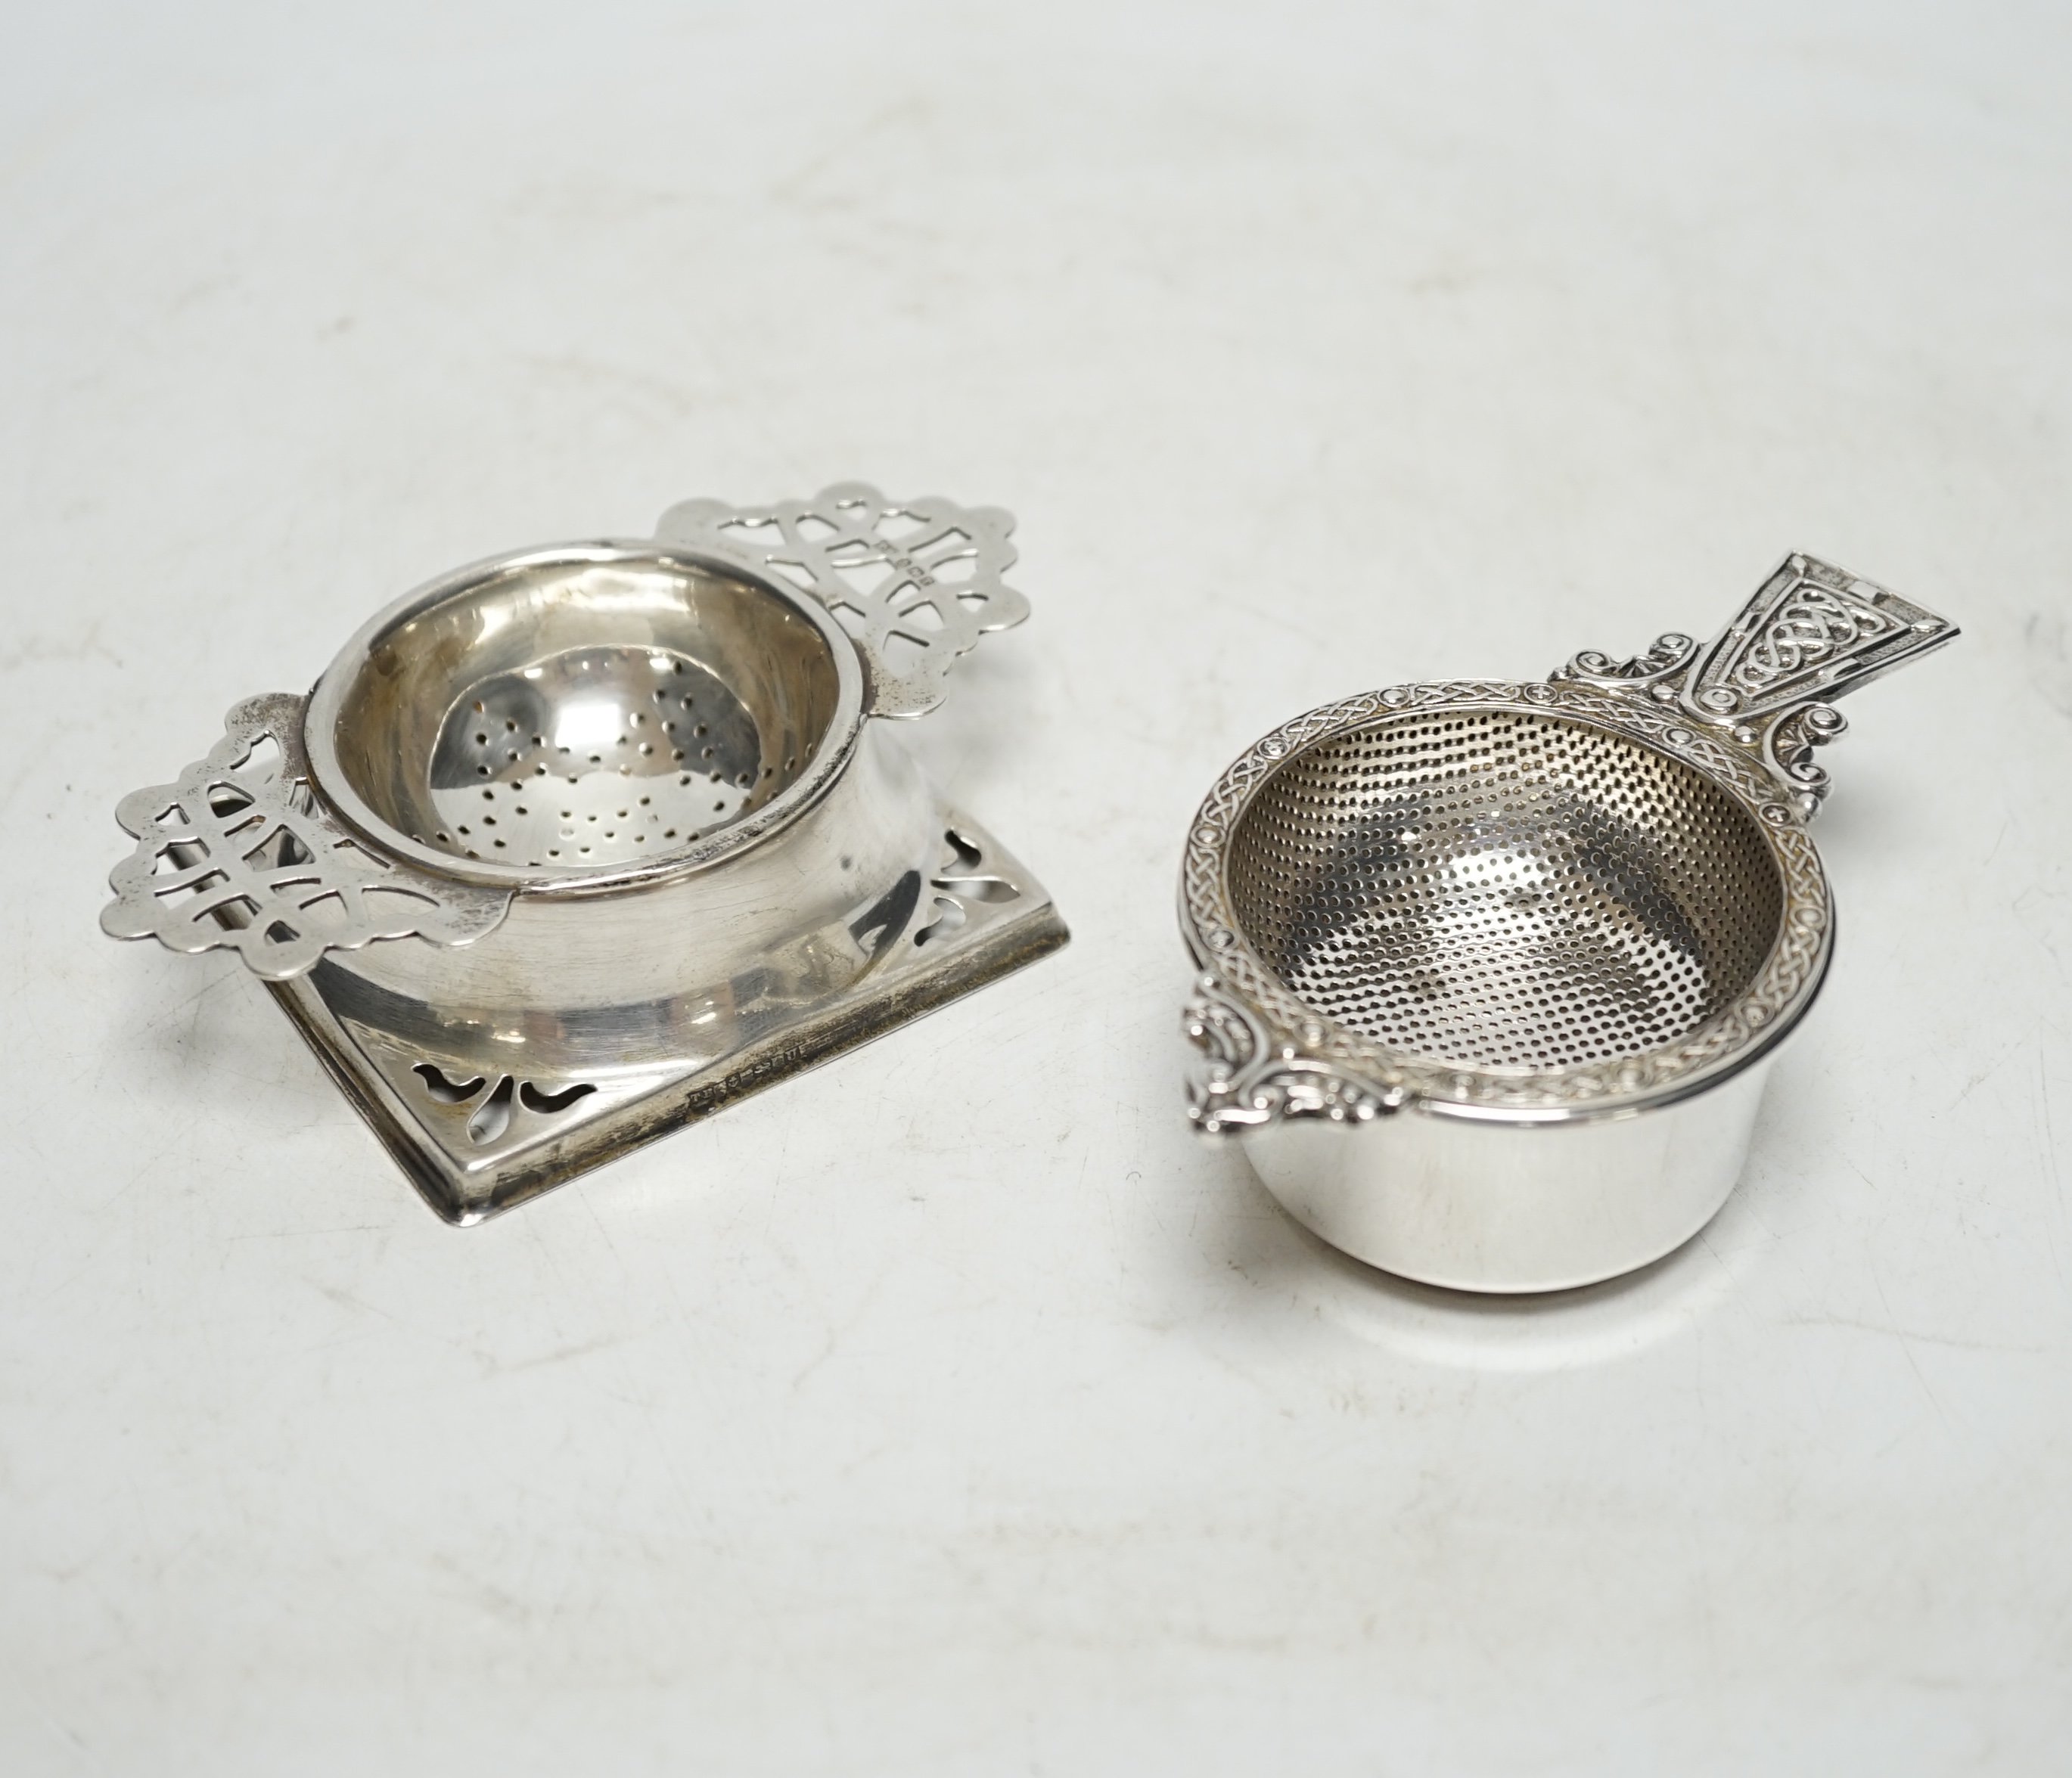 An Elizabeth II silver tea strainer and stand, with Celtic decoration, by Mappin & Webb, Sheffield, 1962, 10.7cm and one other silver tea strainer on stand. Condition - fair